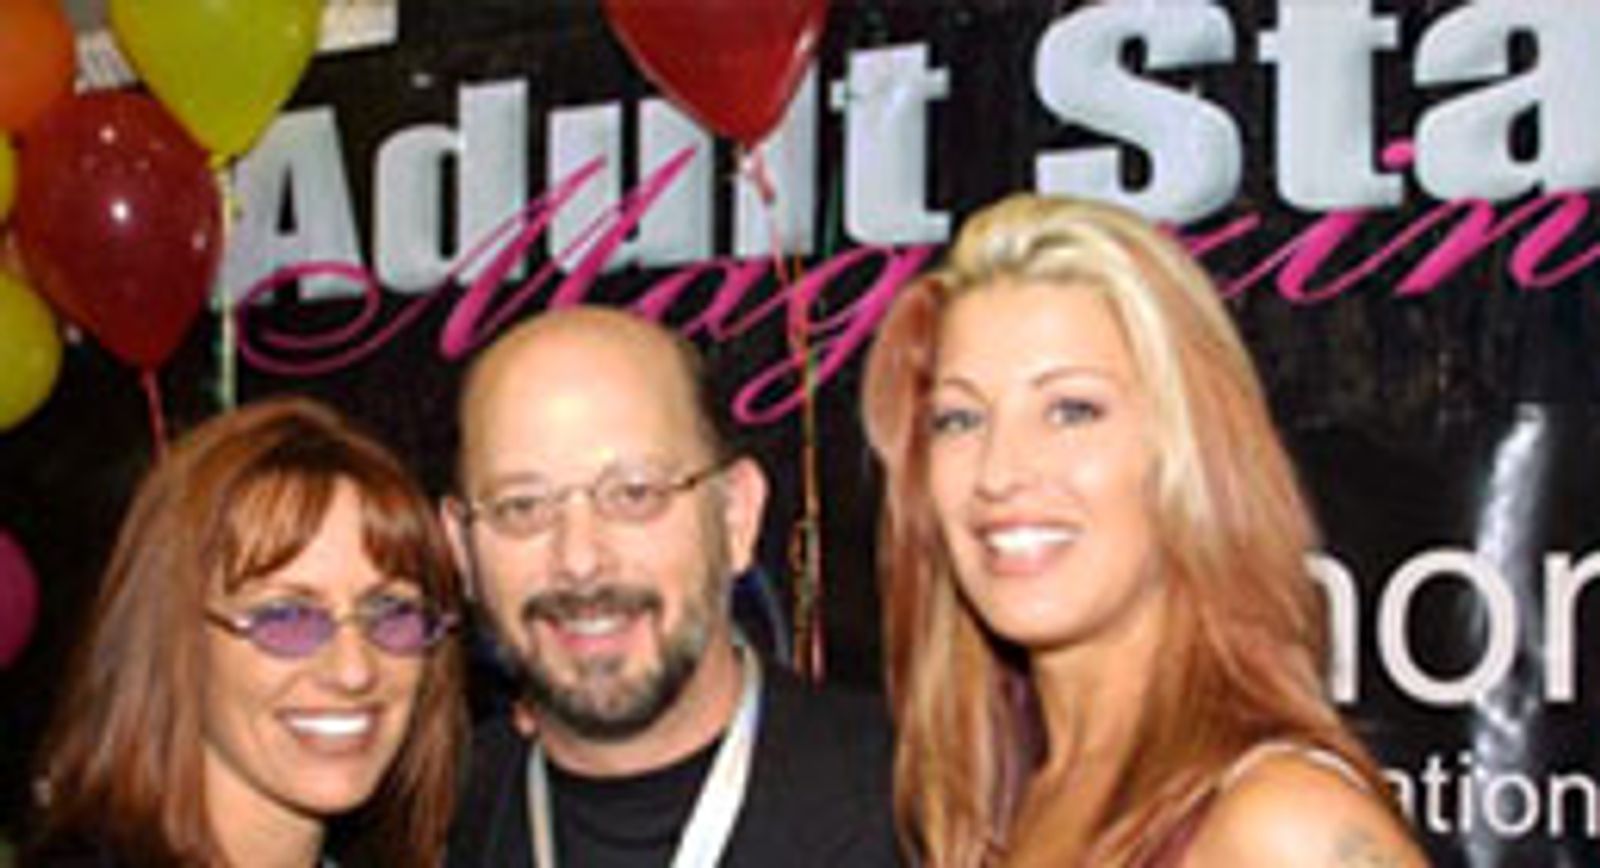 Cartwright, <I>Adult Stars Magazine</I> CEO and founder, Steps Down